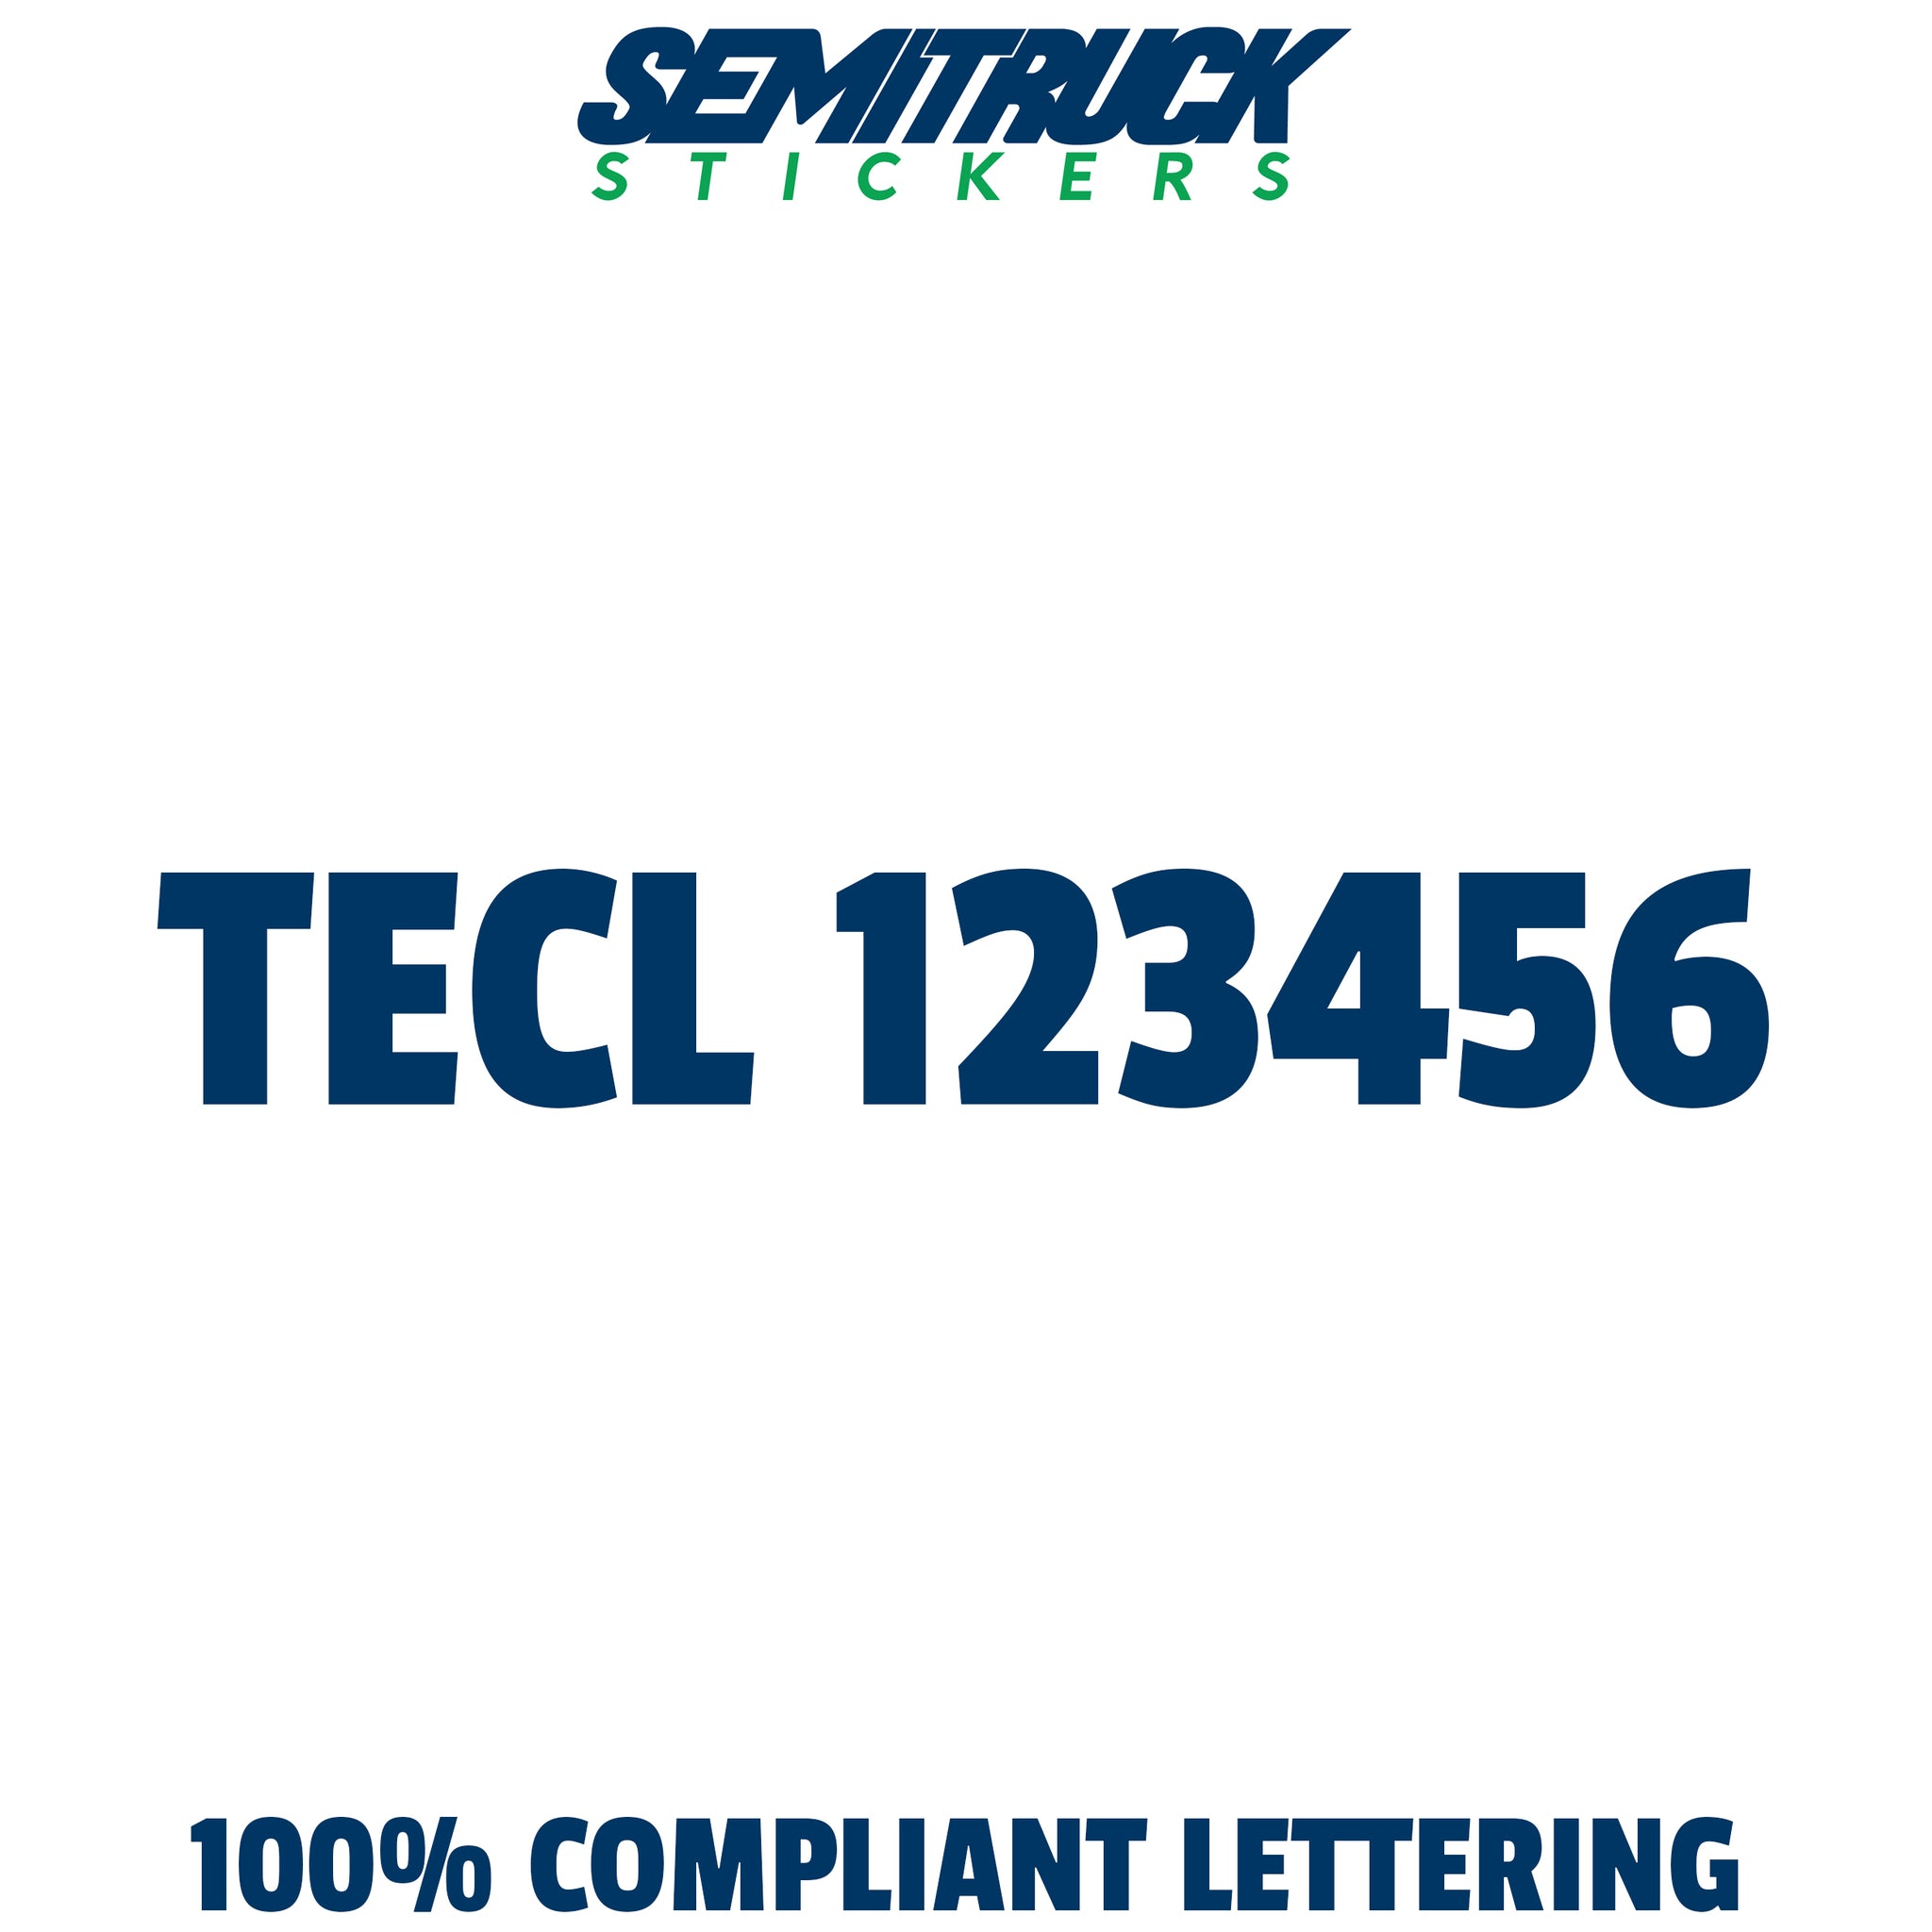 TECL number sticker